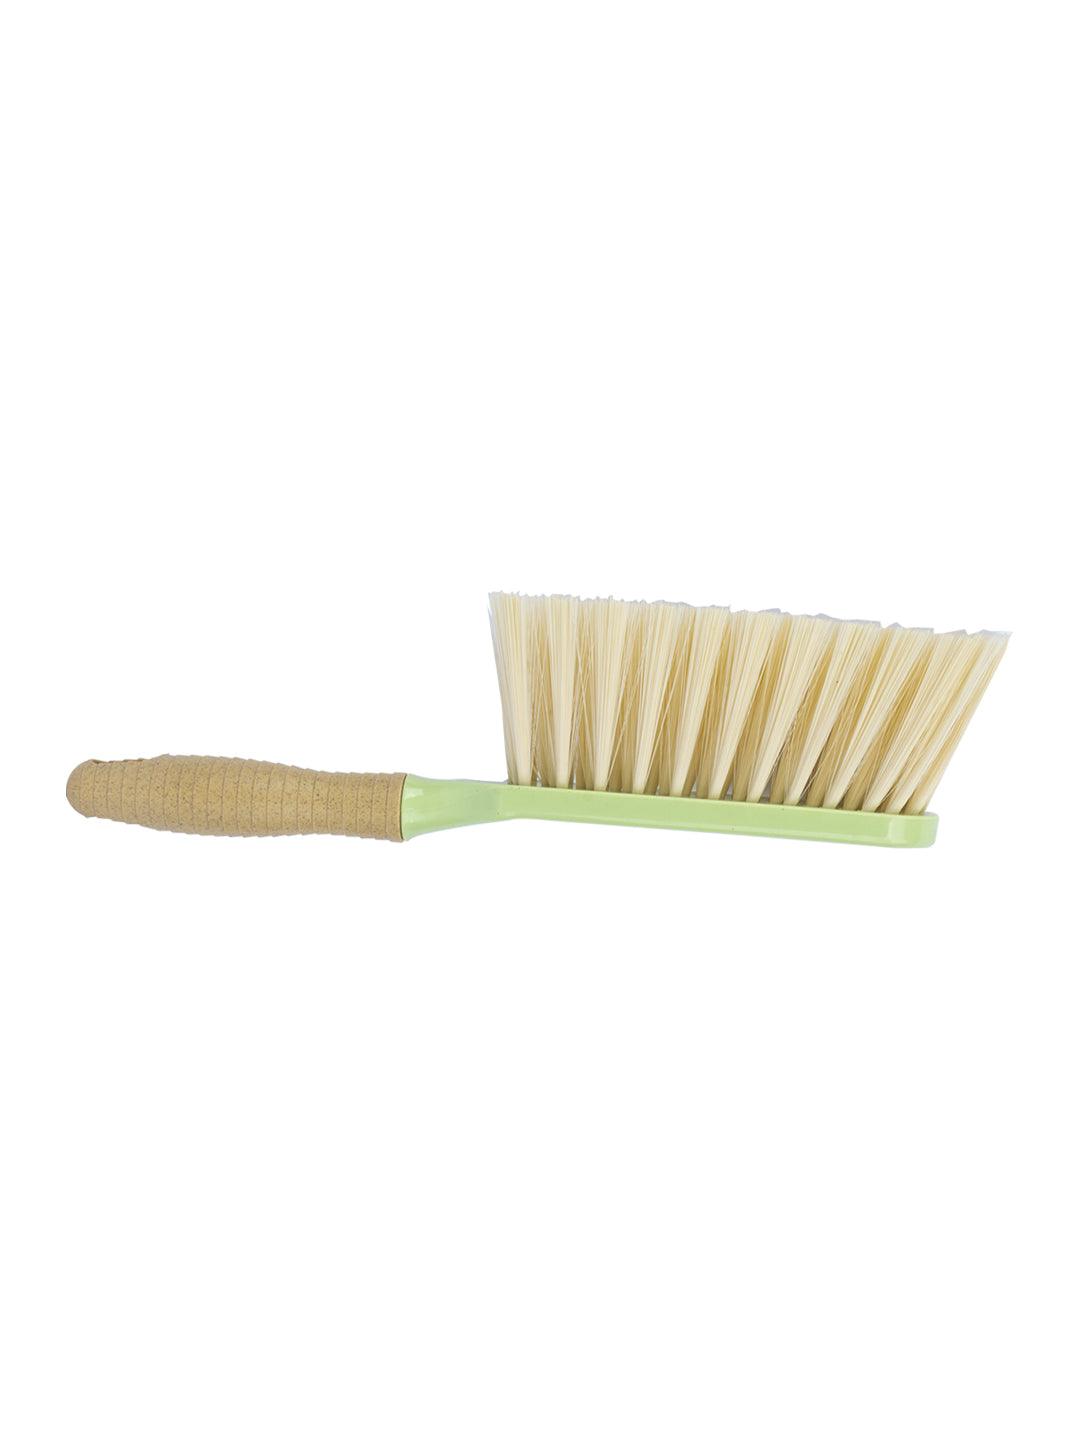 Buy Plastic Carpet Cleaning Brush with Long Bristle & Handle at